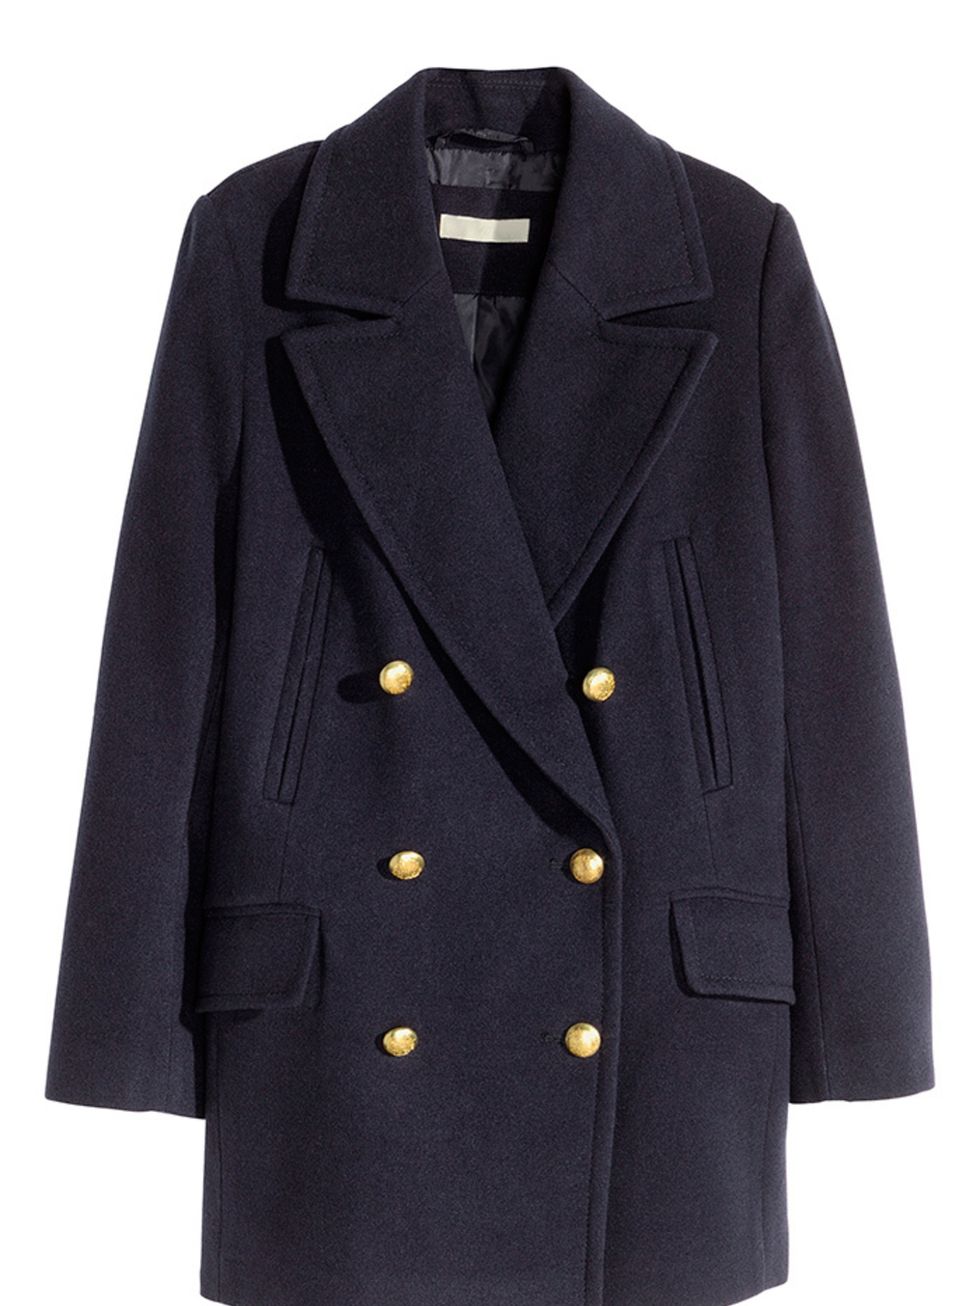 <p>A classic pea-coat never dates. In a neutral colour, you can combine it with different scarves to alternate your look.</p>

<p><a href="http://www.hm.com/gb/product/32011?article=32011-B" target="_blank">H&M</a> coat, £49.99</p>